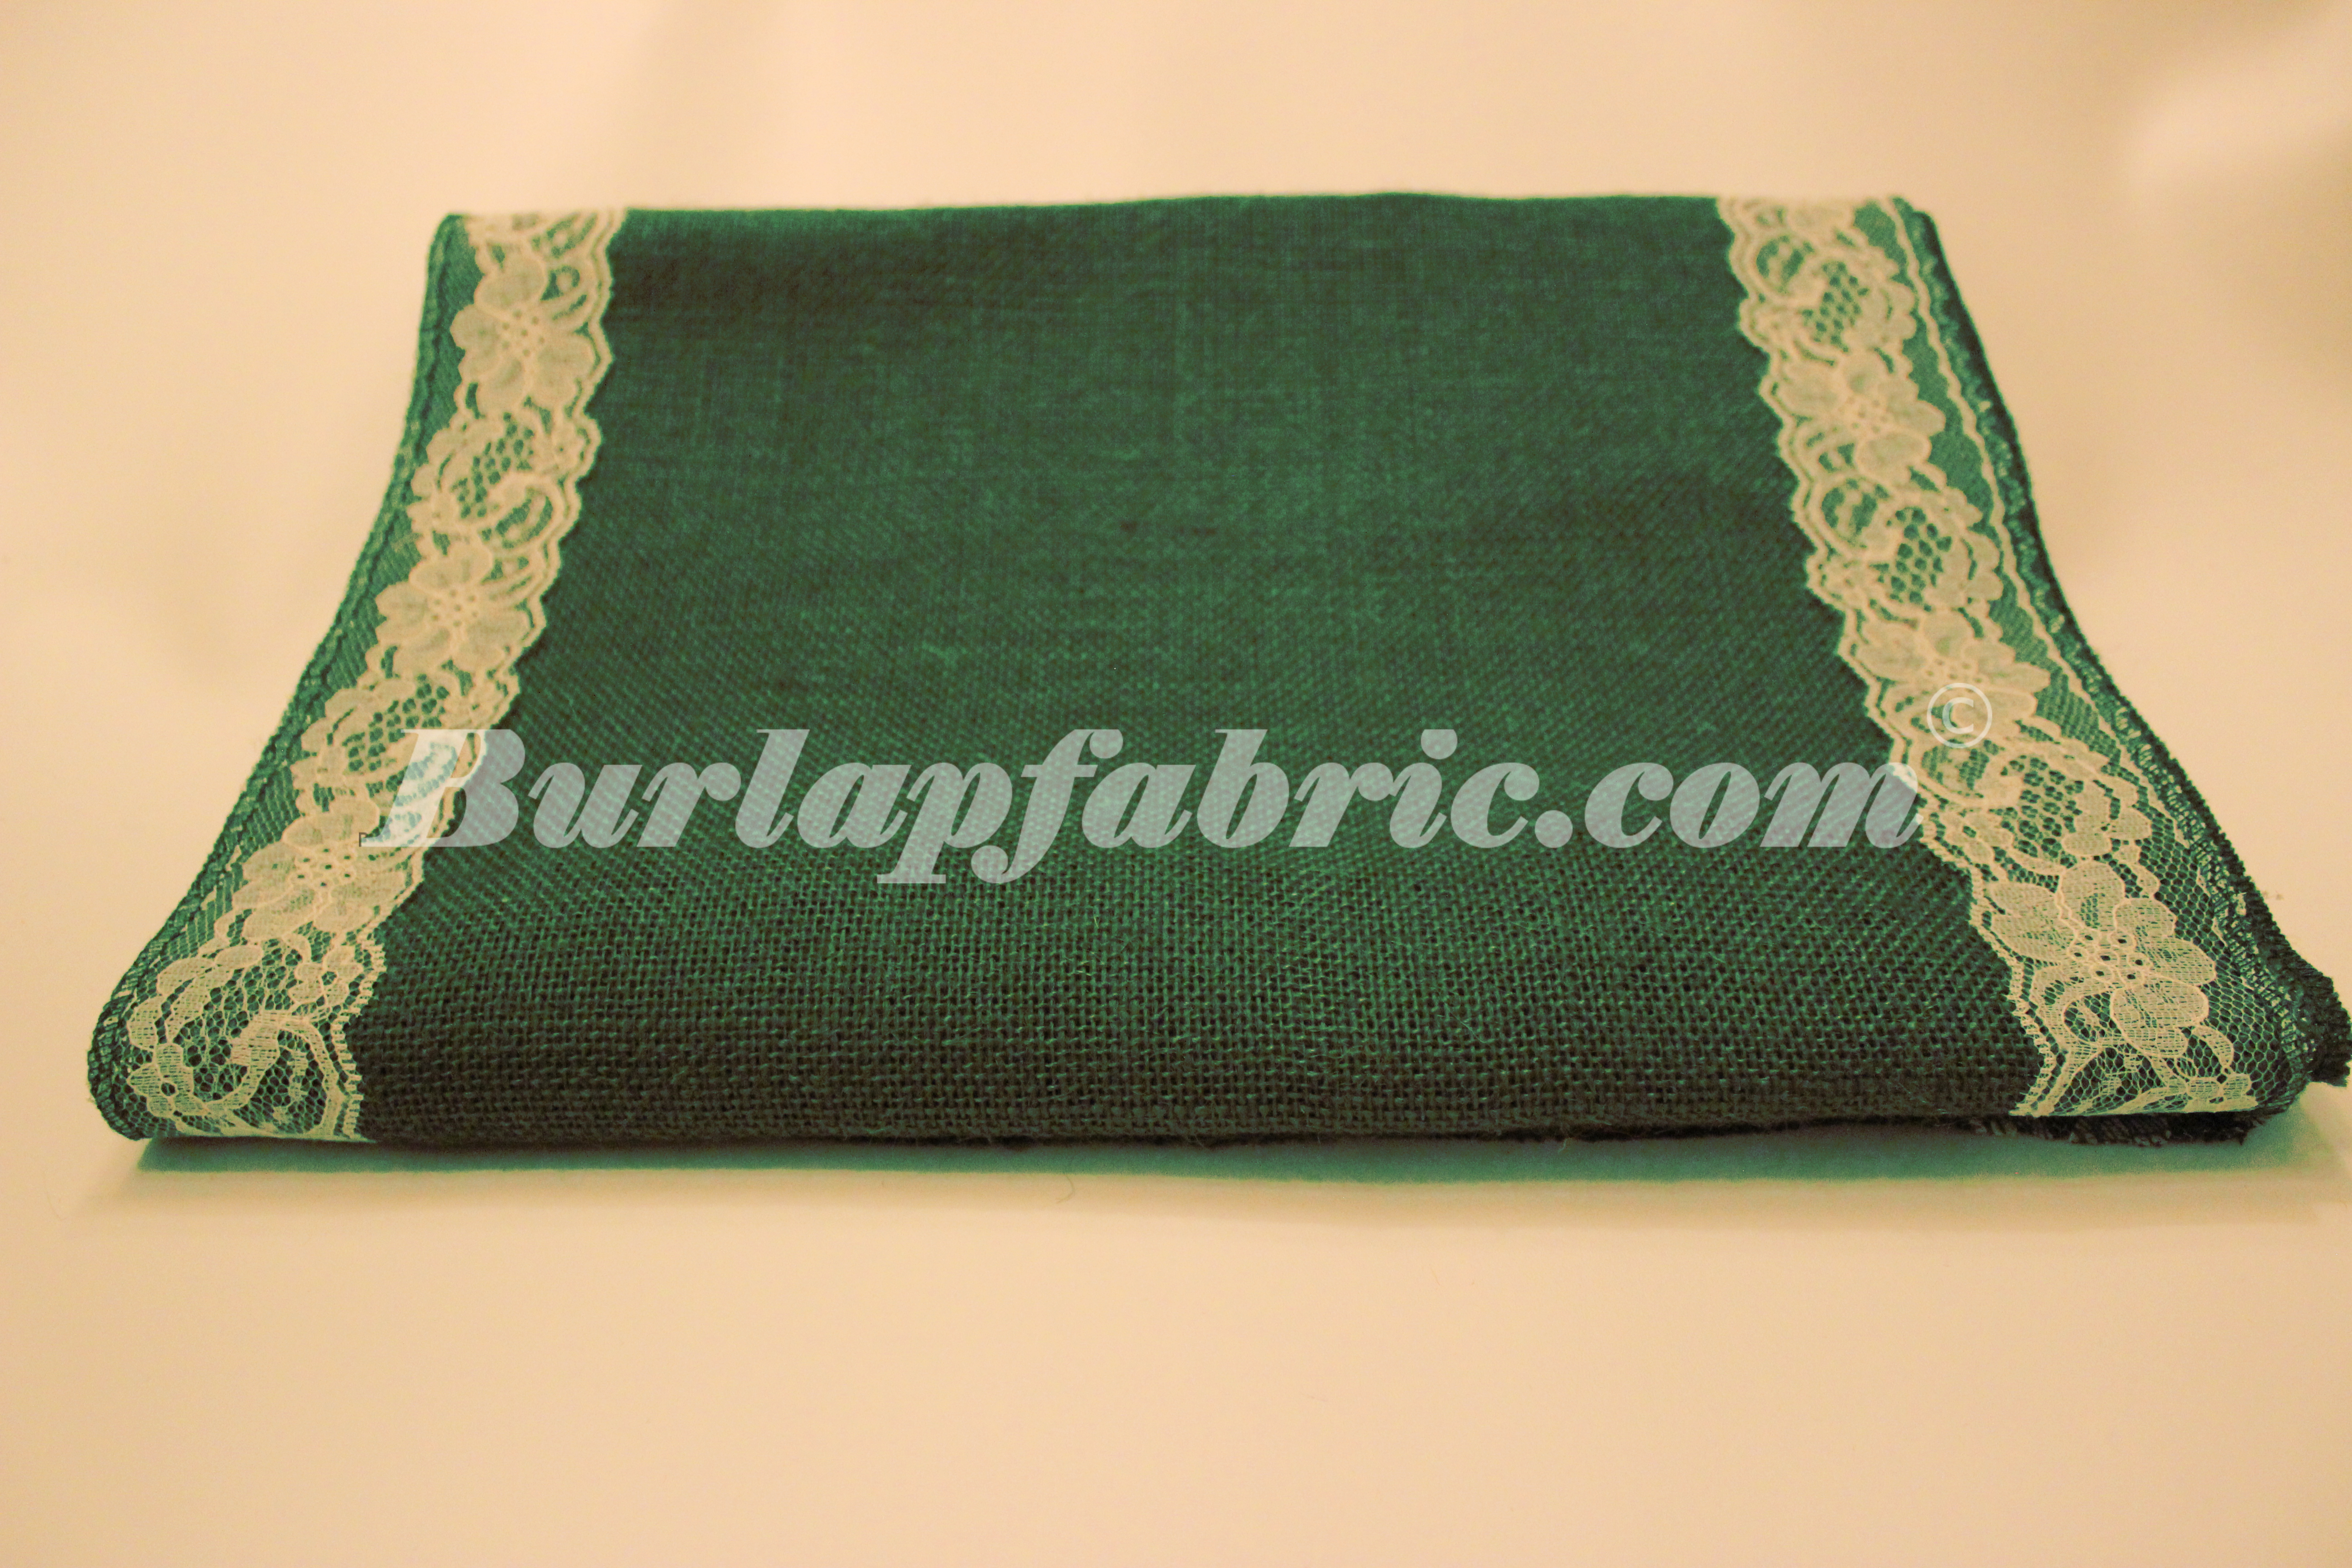 14" Hunter Green Burlap Runner with 2" Ivory Lace Borders - Click Image to Close